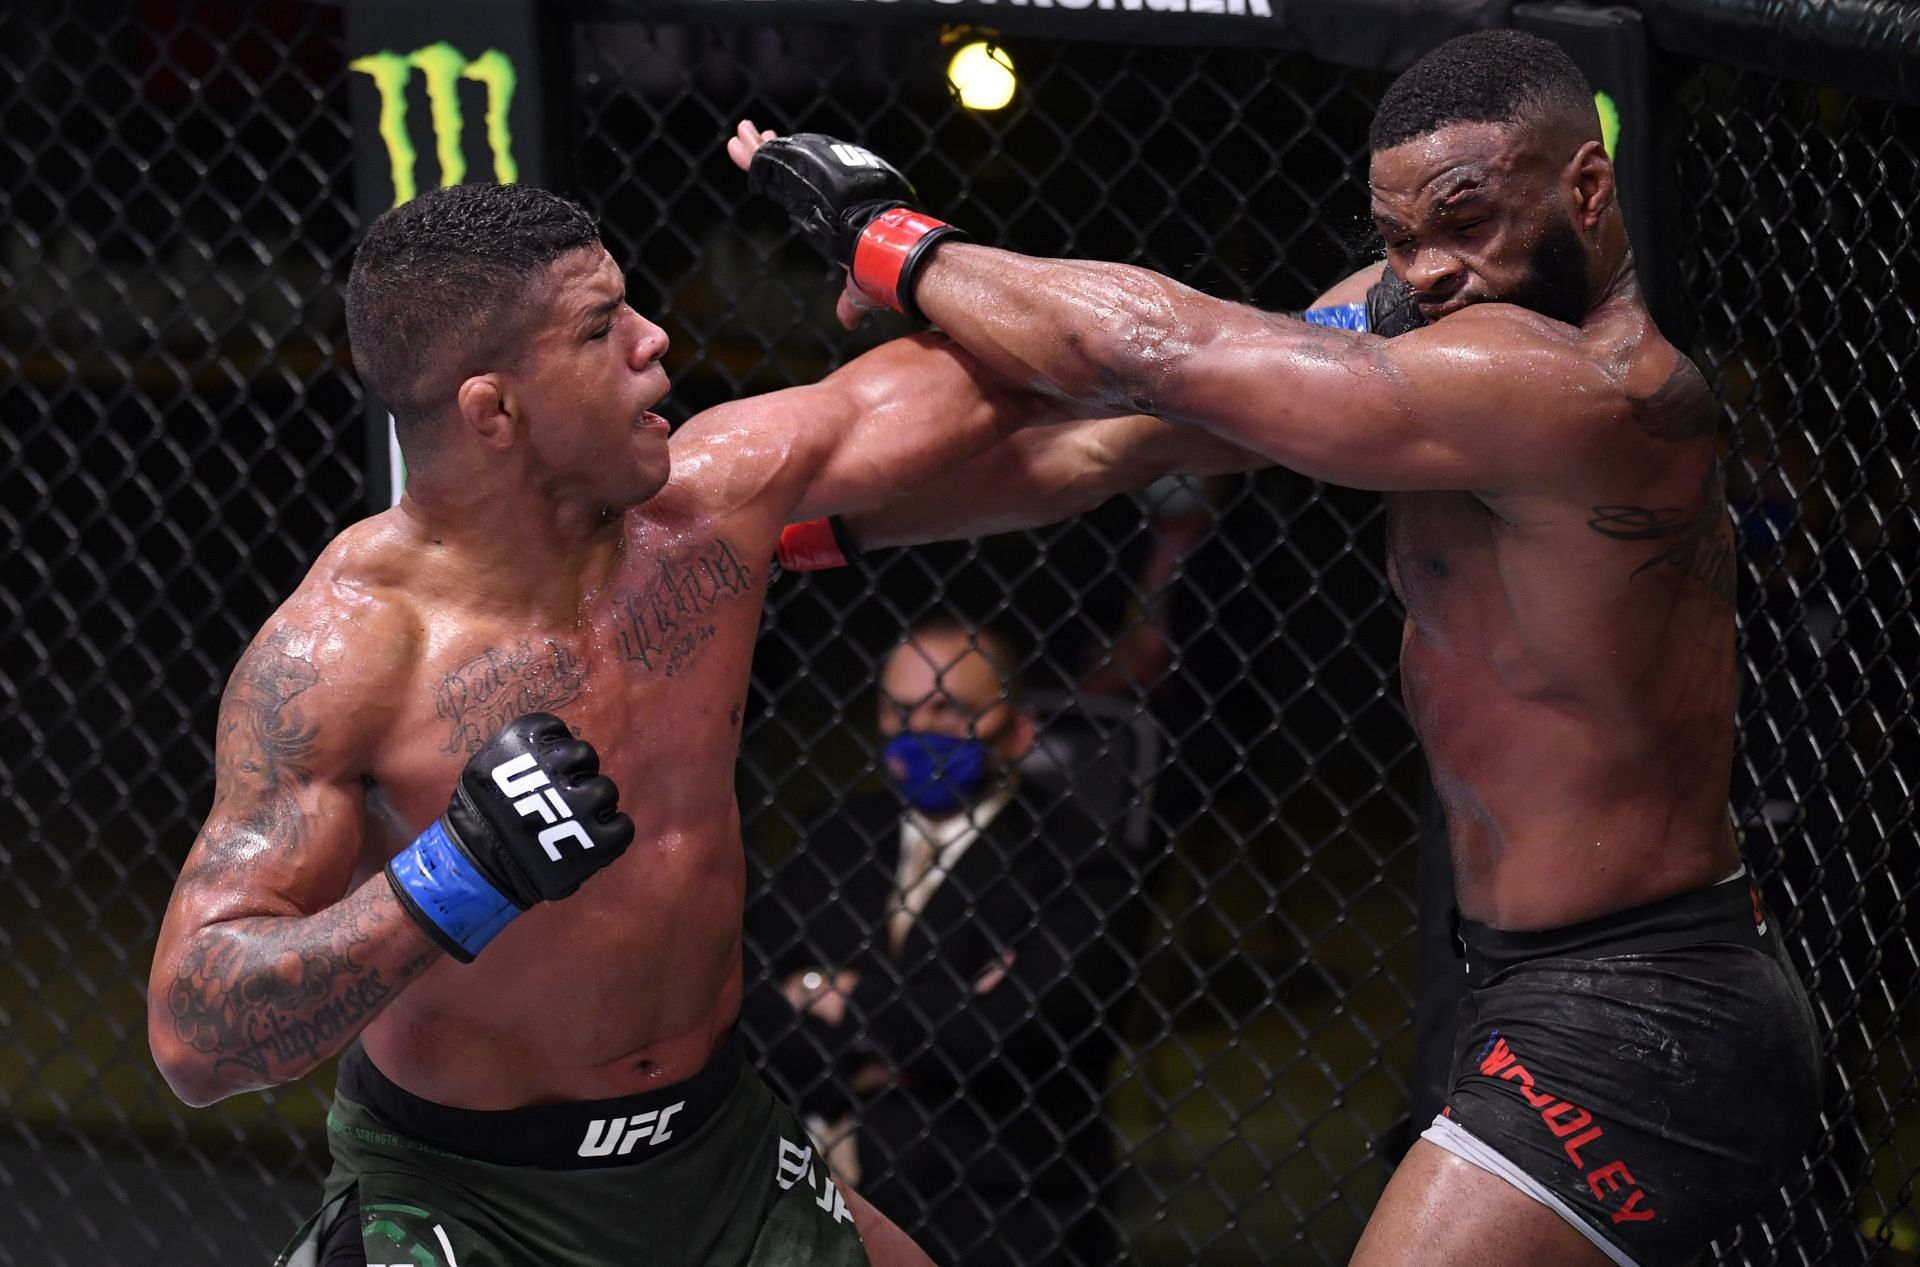 A win over Gilbert Burns would mean more than a win over any other welterweight right now